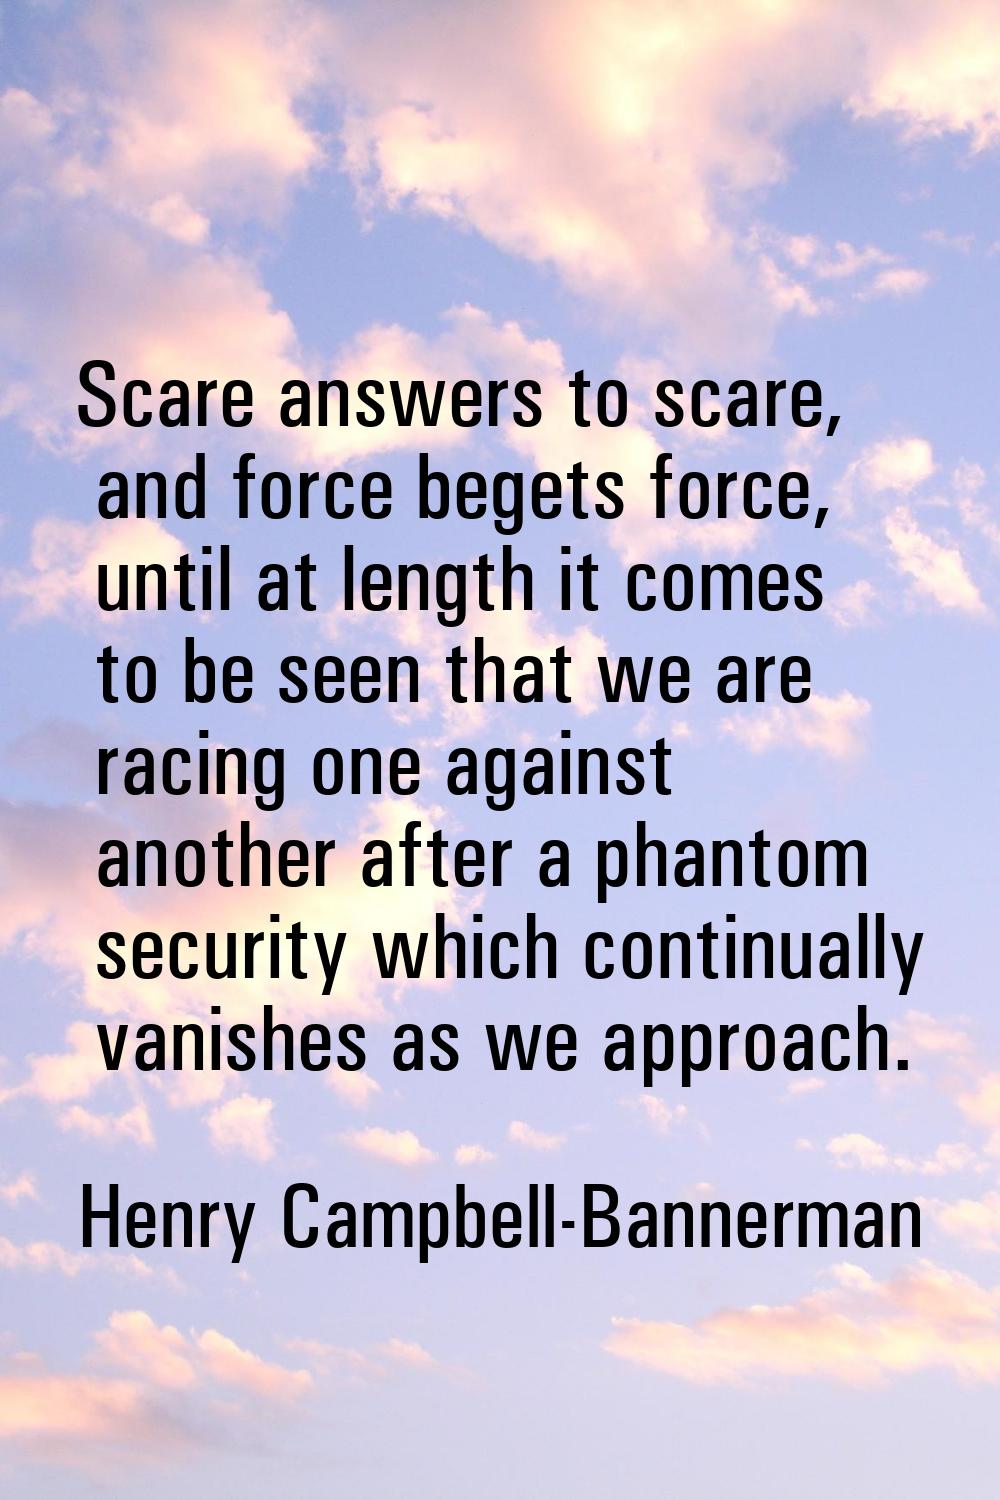 Scare answers to scare, and force begets force, until at length it comes to be seen that we are rac